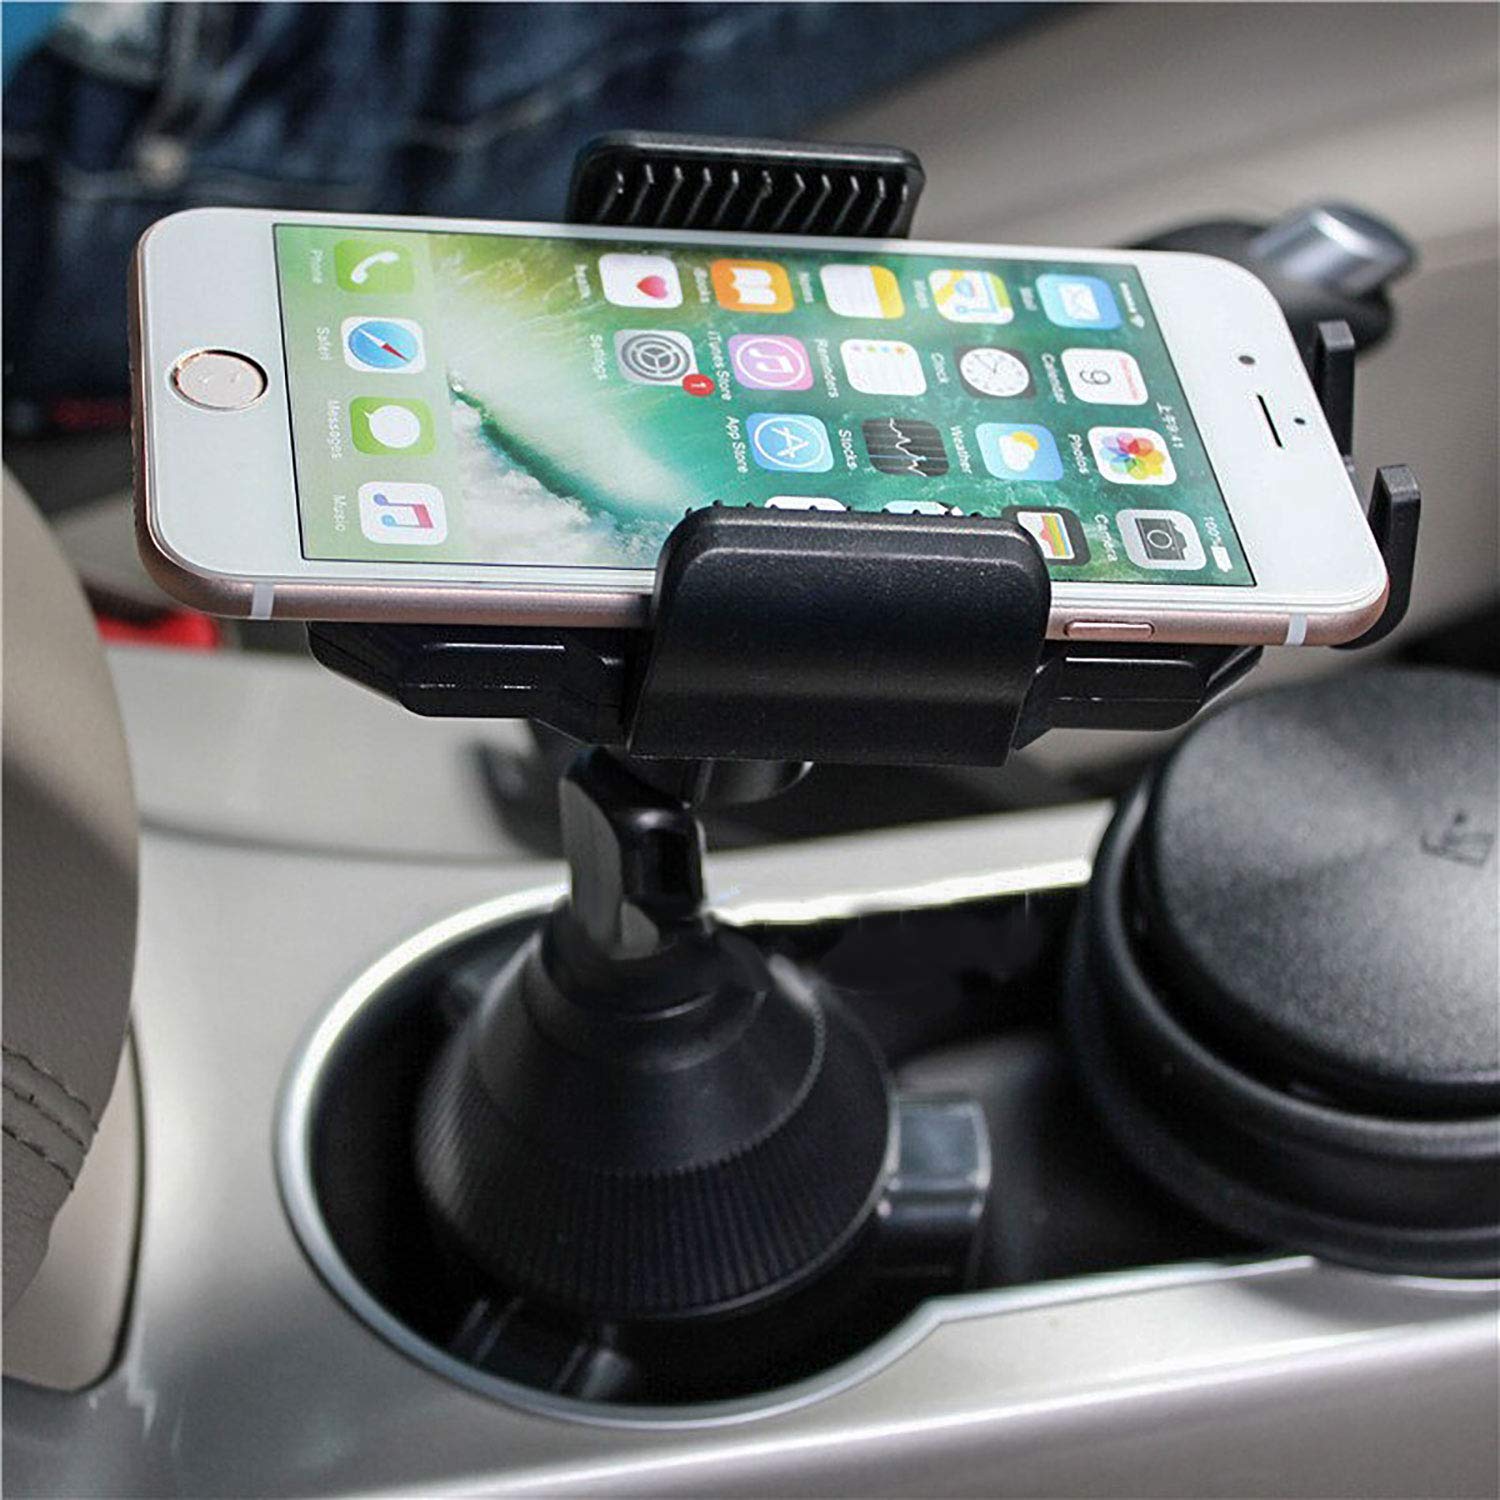 Cup Holder Phone Mount for Car Universal Adjustable Car Mount for iPhone 11 Pro Max/11 Pro/11/Xs/Max/X/XR/8/8/7/6 Plus,Note 10/Note 10+/Note 9/ S10+/ S10/ S9/ S9+/ S8 - image 3 of 6